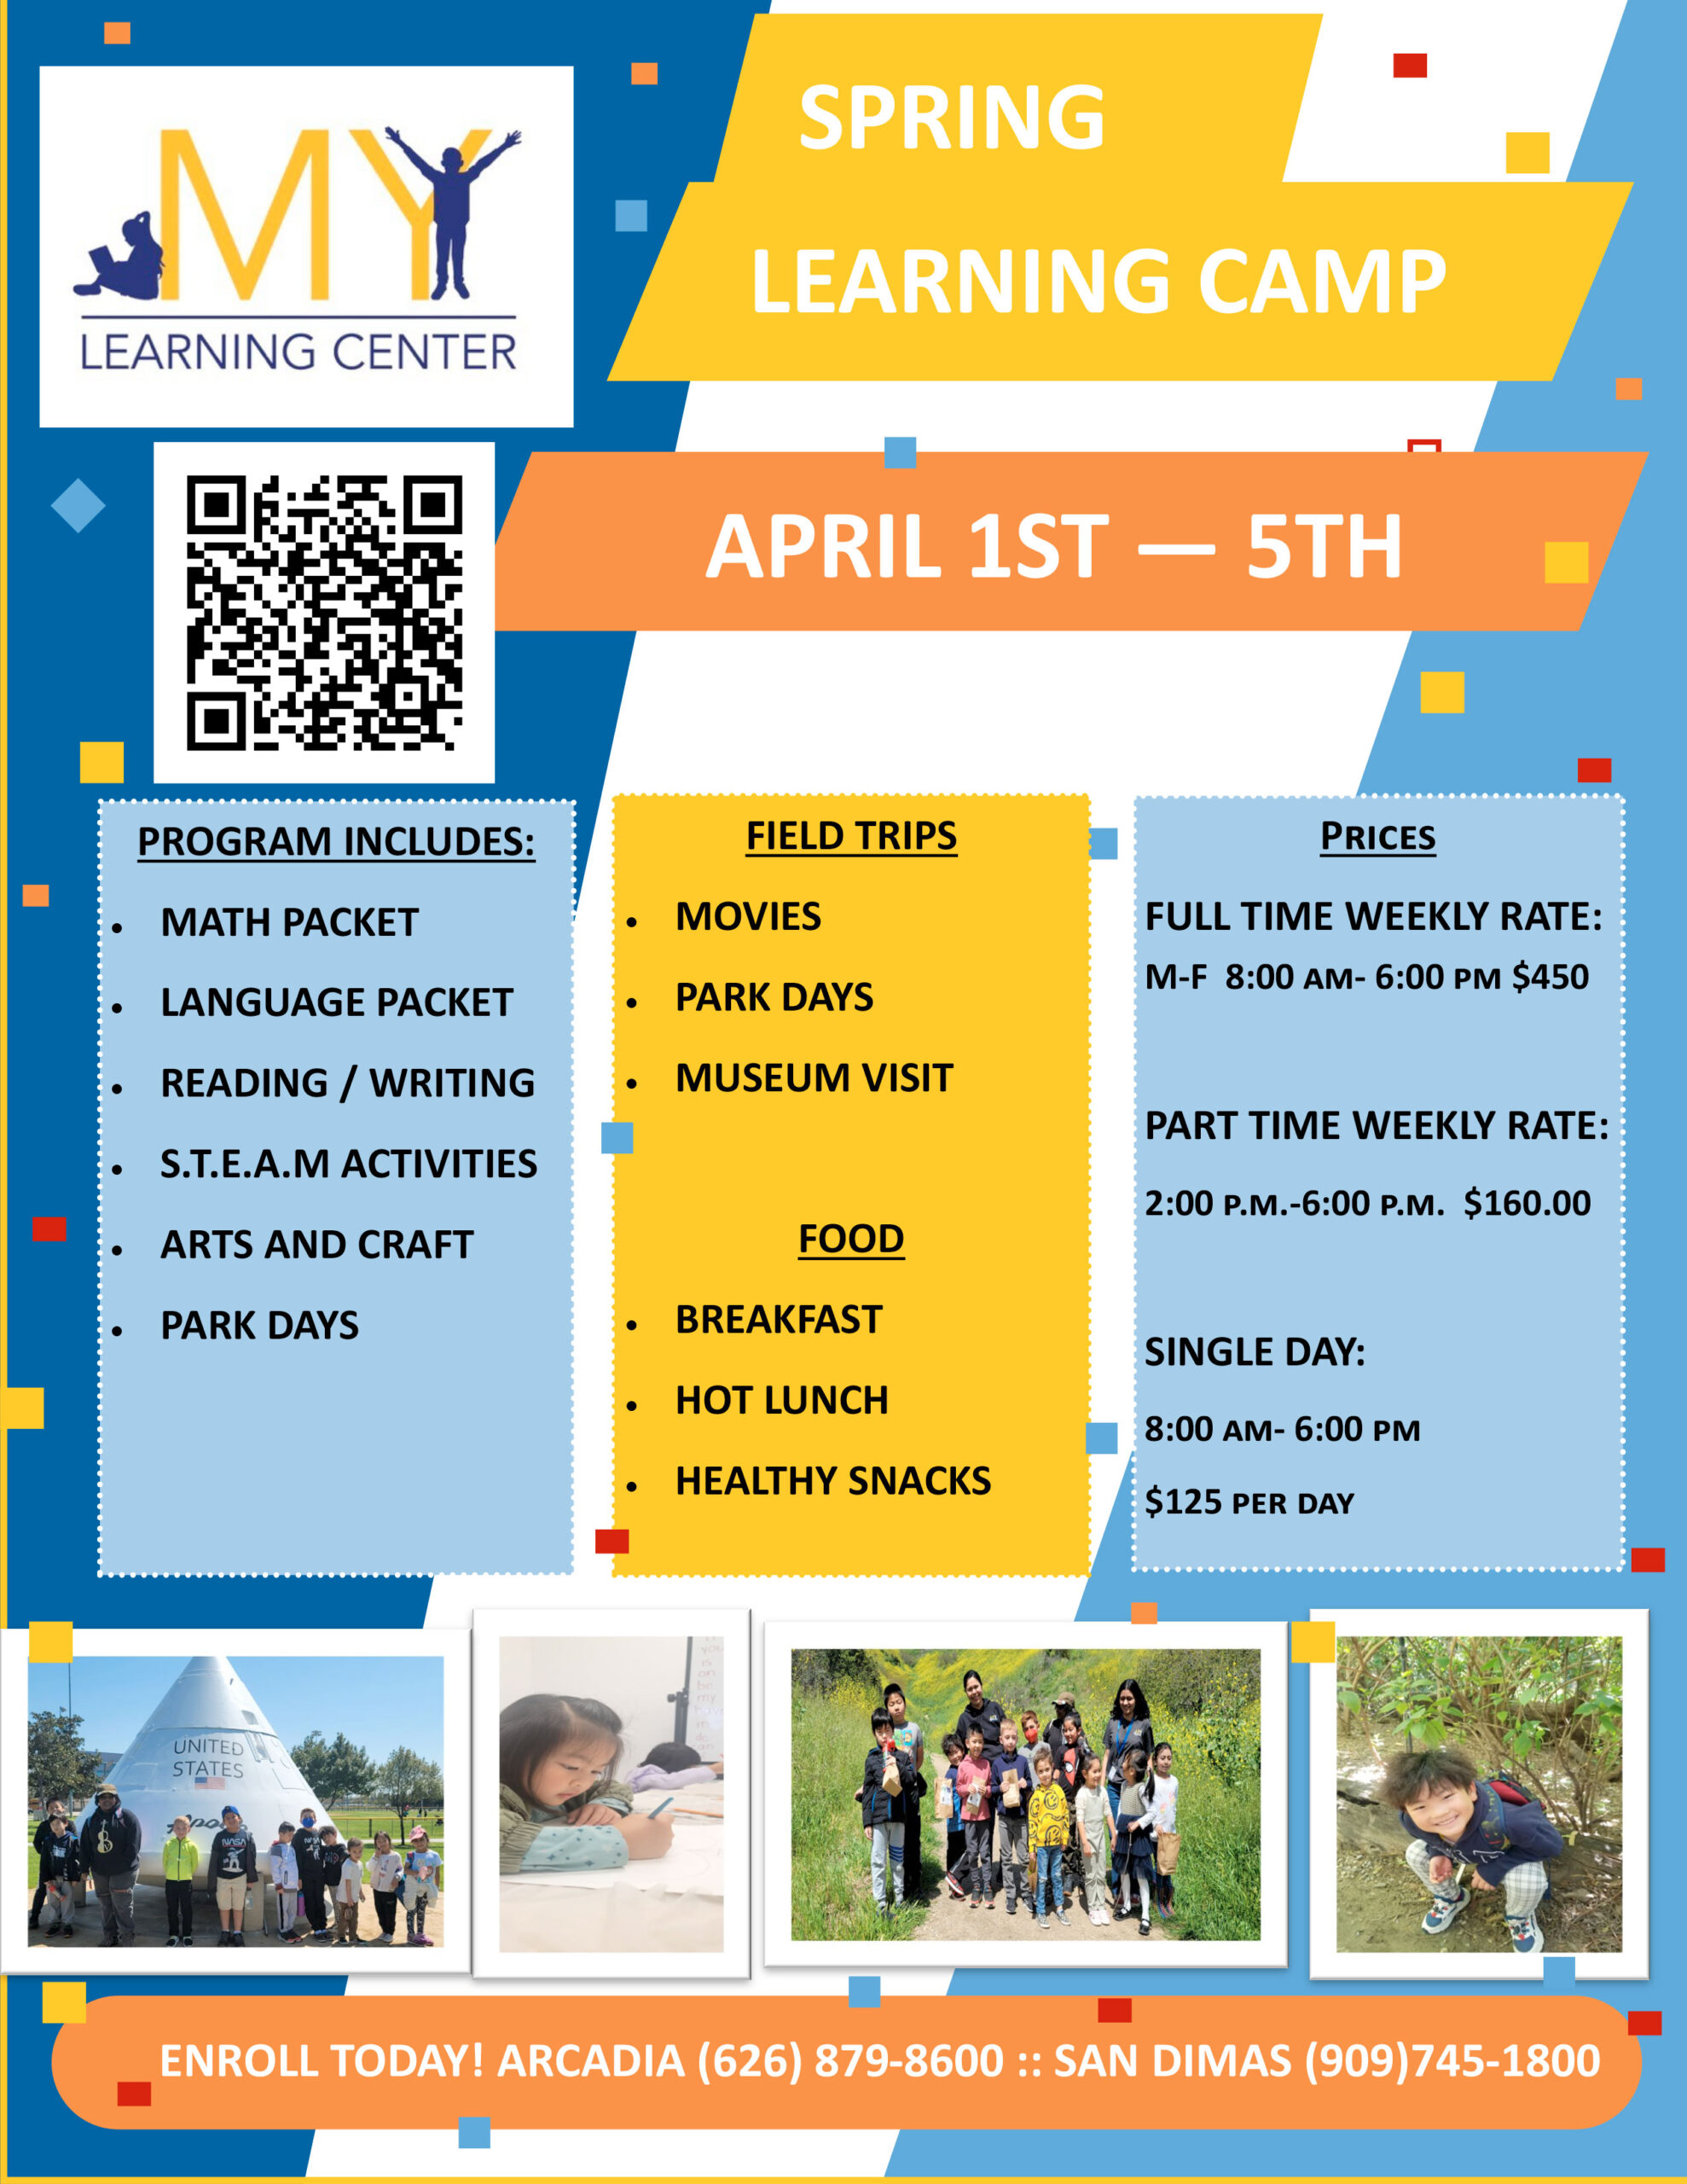 My Learning Center Spring Learning Camp flyer 